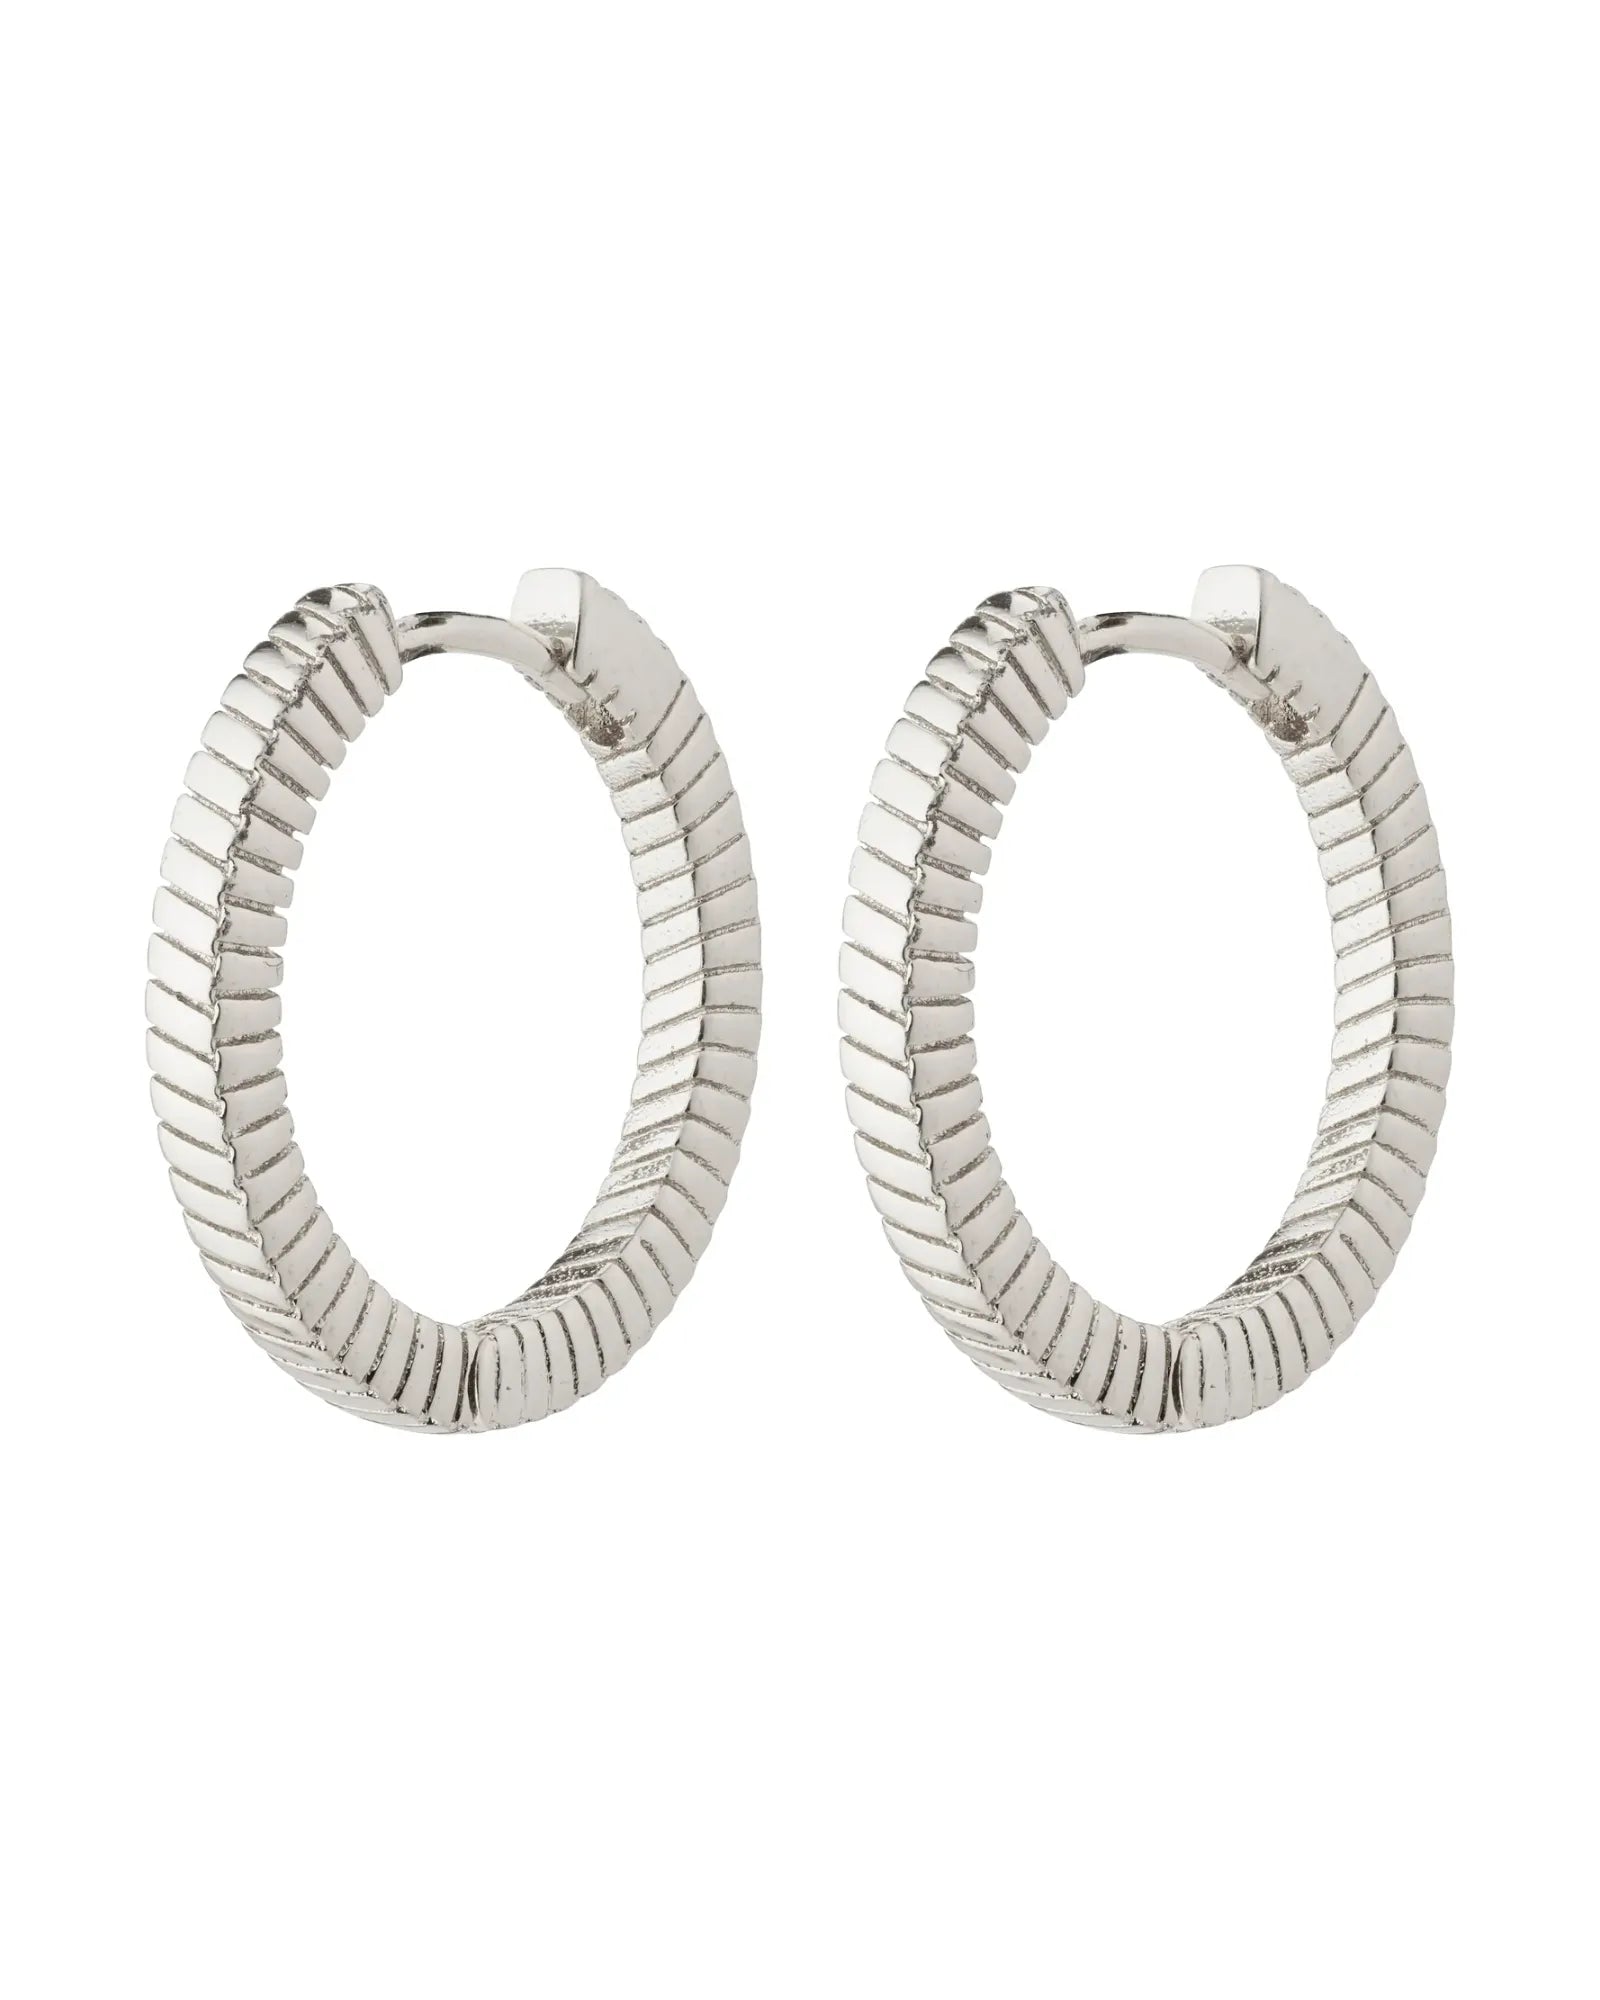 DOMINIQUE Recycled Hoop Earrings - Silver Plated